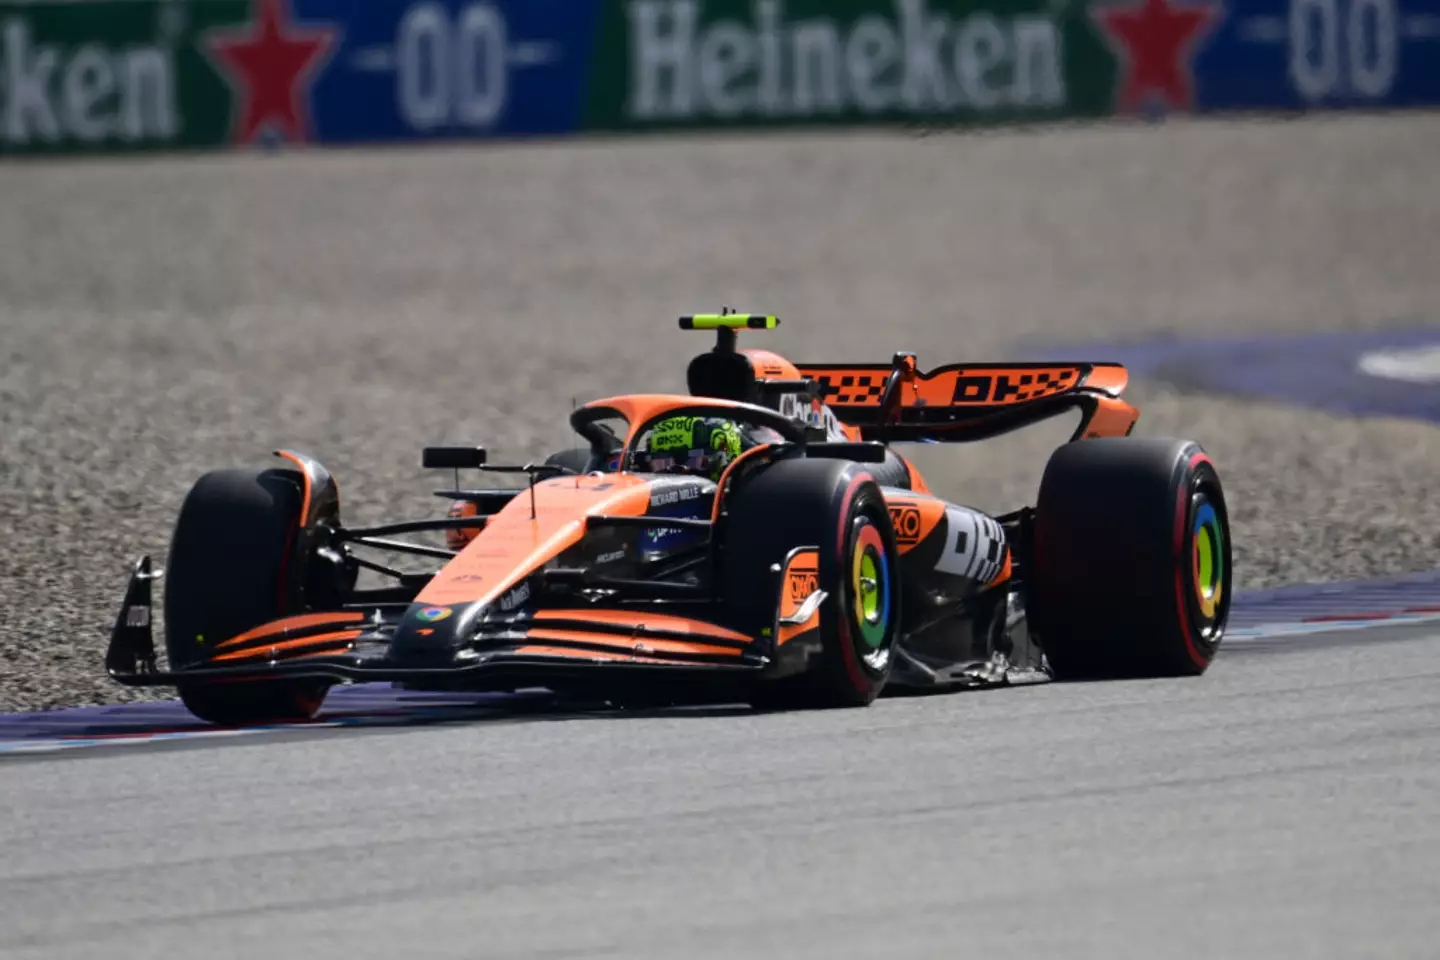 Lando Norris is currently 81 points Max Verstappen in the Driver's Championship. (Image: Getty)